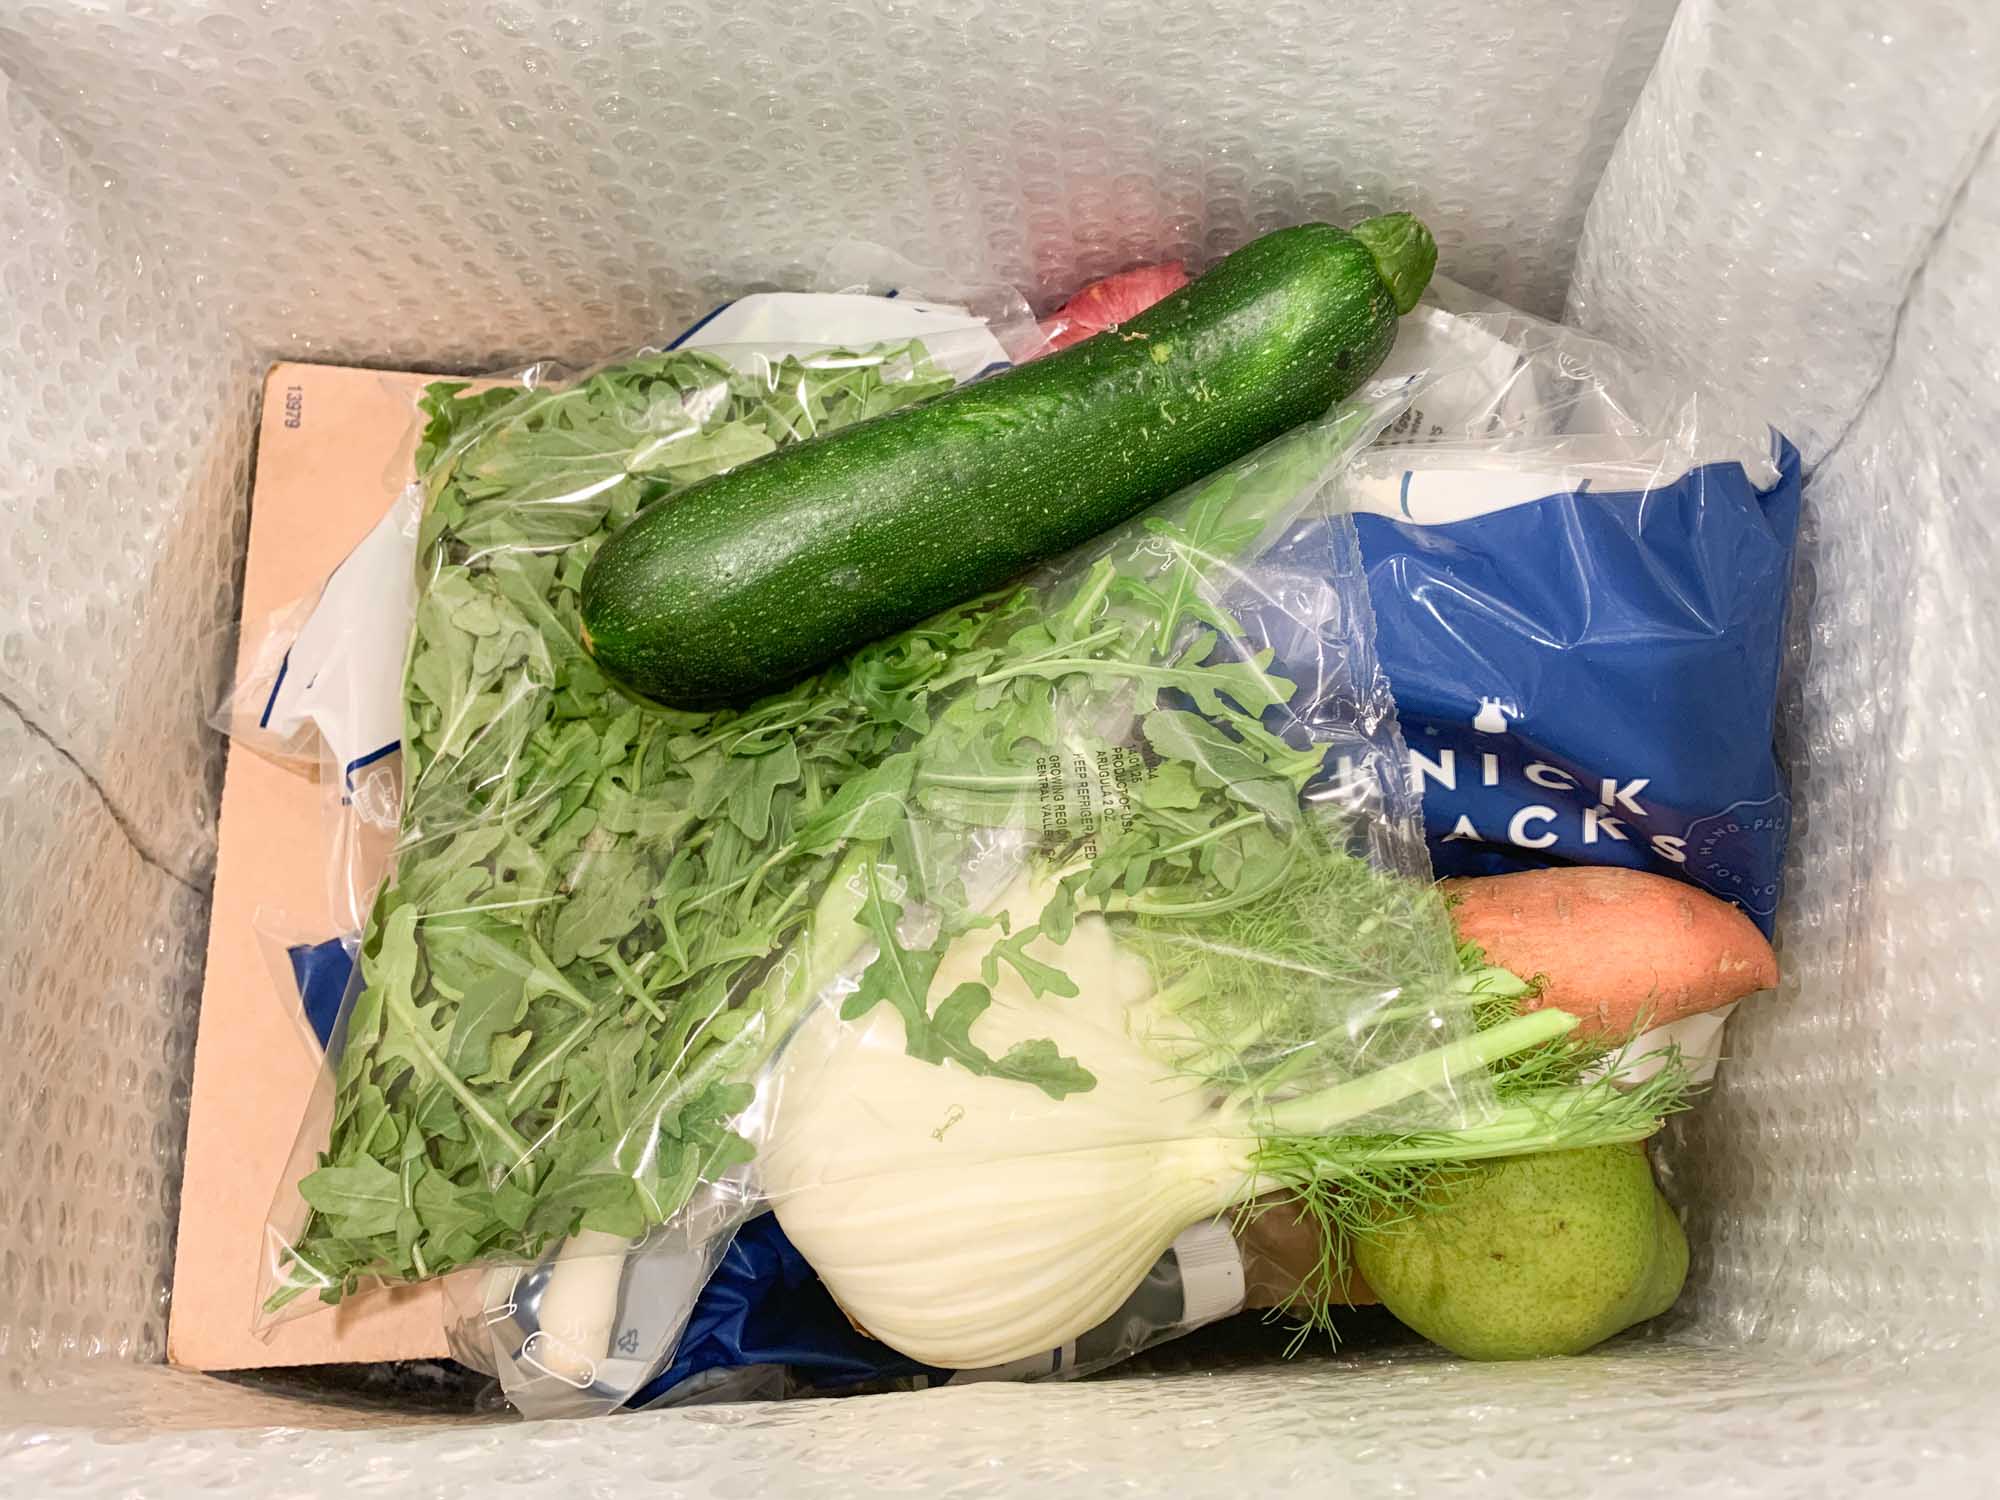 haphazardly packaged ingredients from Blue Apron